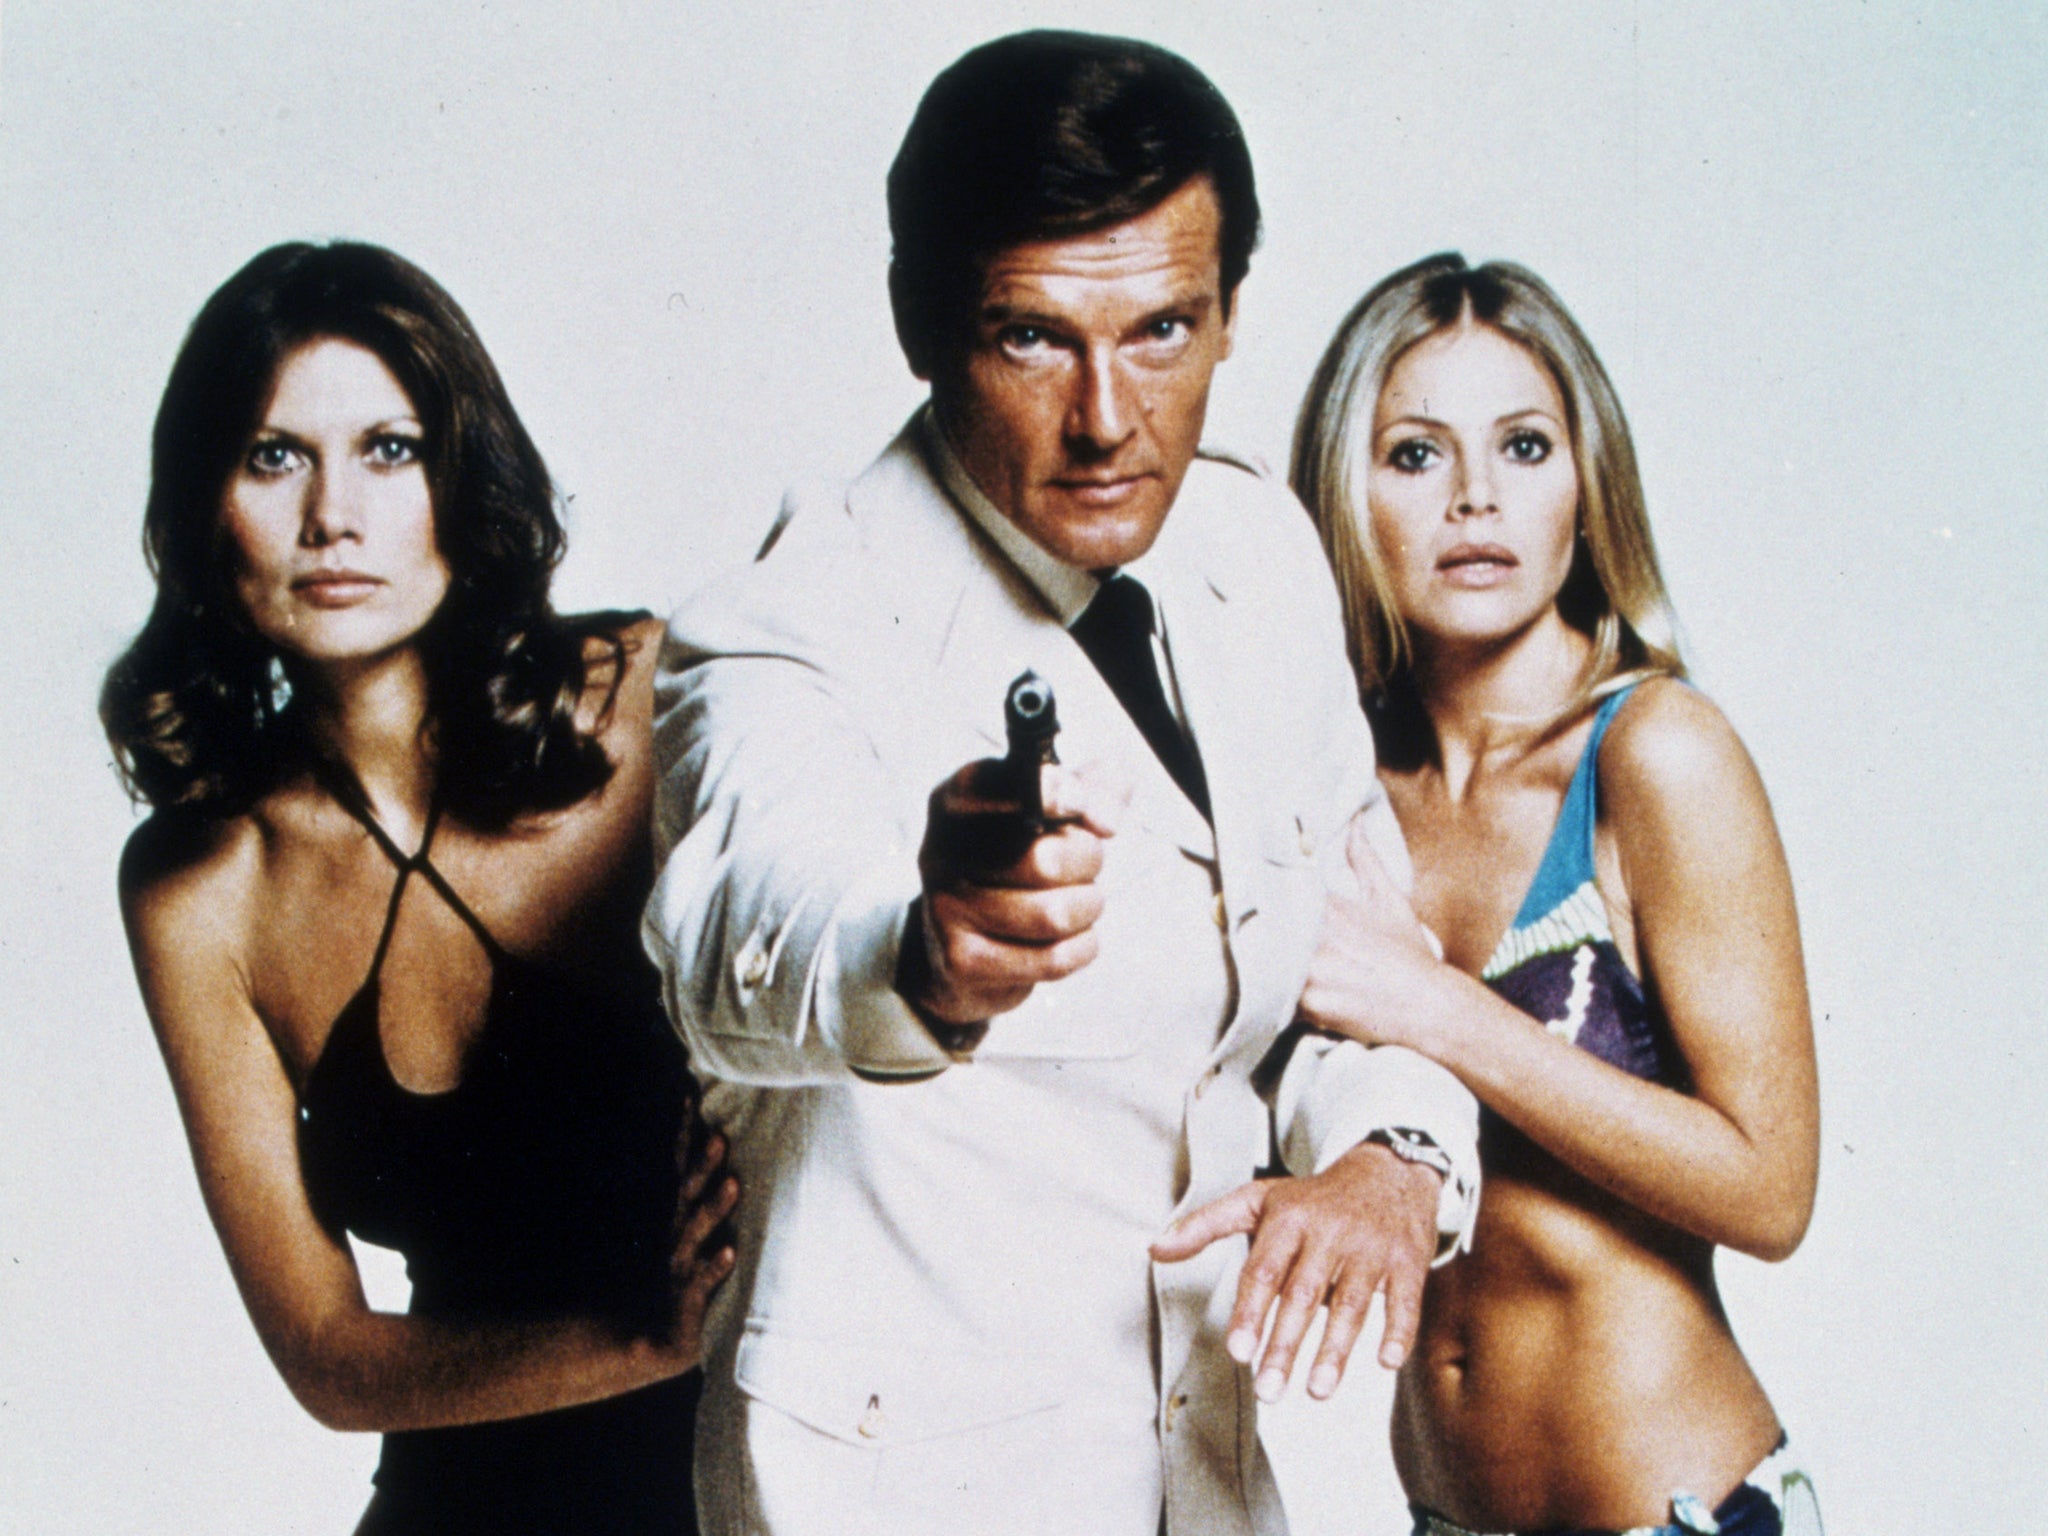 Double-oh heaven: Roger Moore – and Bond girls – in 1974’s The Man With the Golden Gun